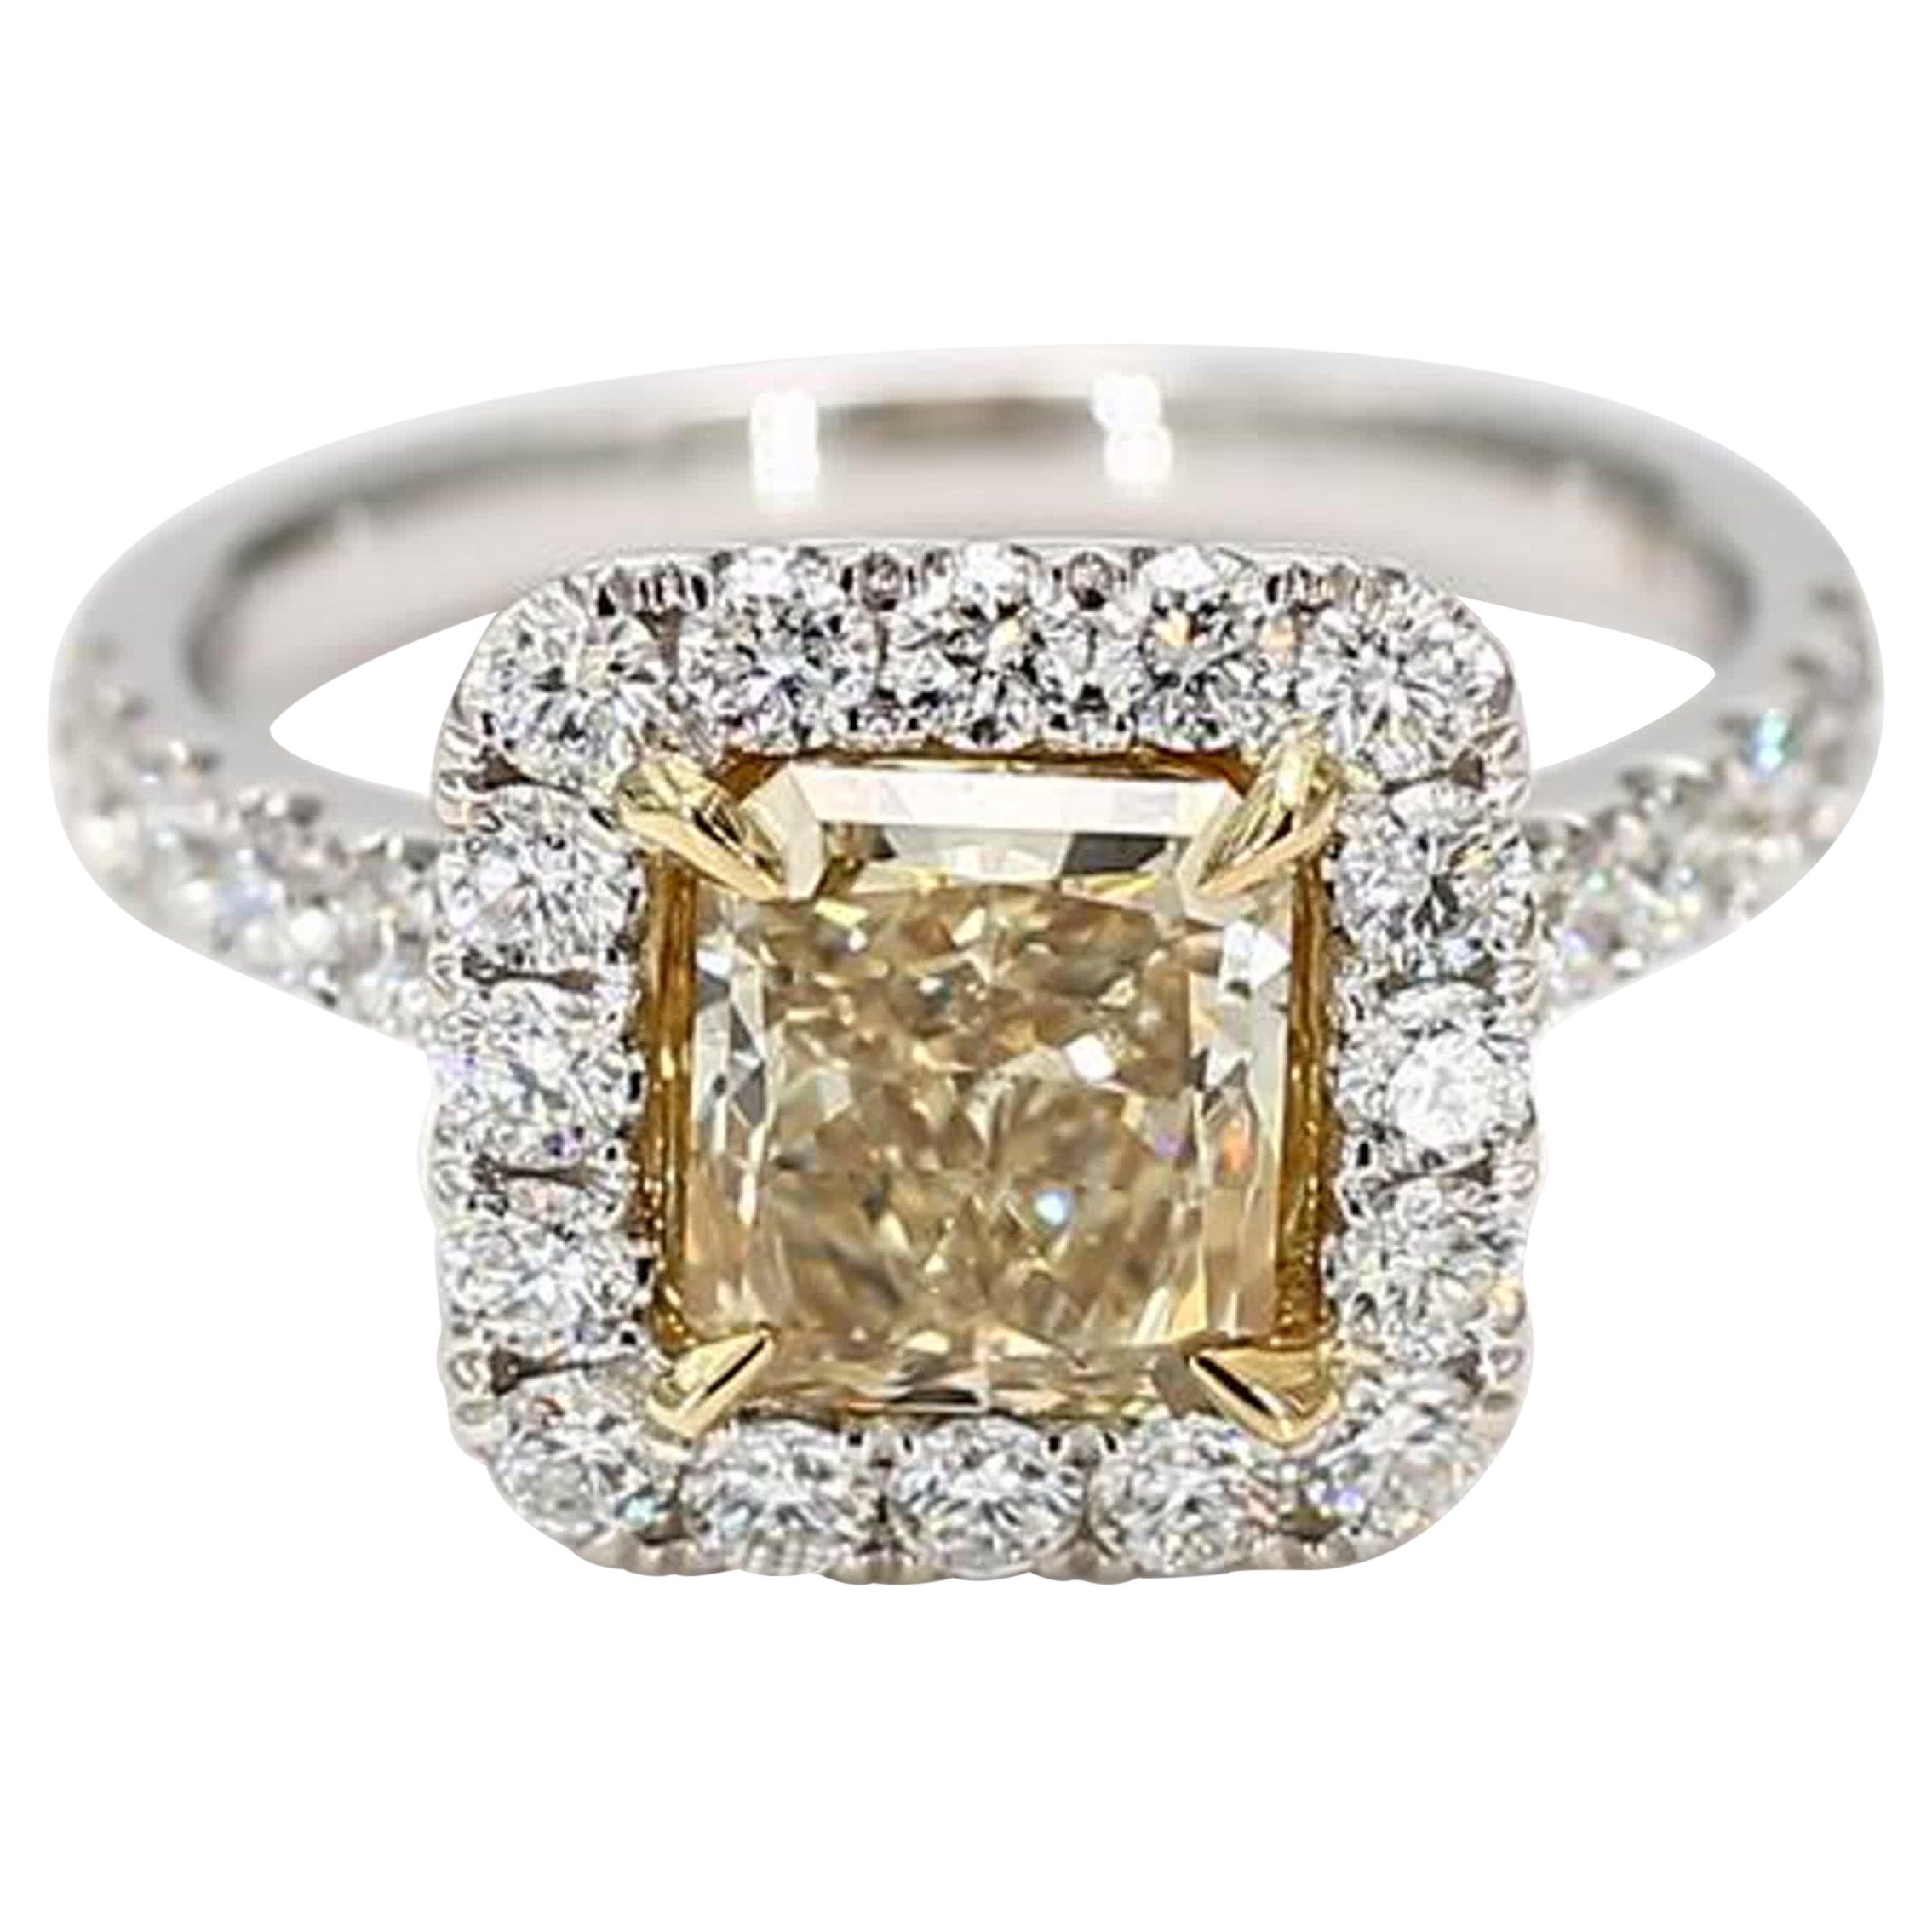 GIA Certified Natural Yellow Radiant Diamond 2.78 Carat TW Gold Cocktail Ring